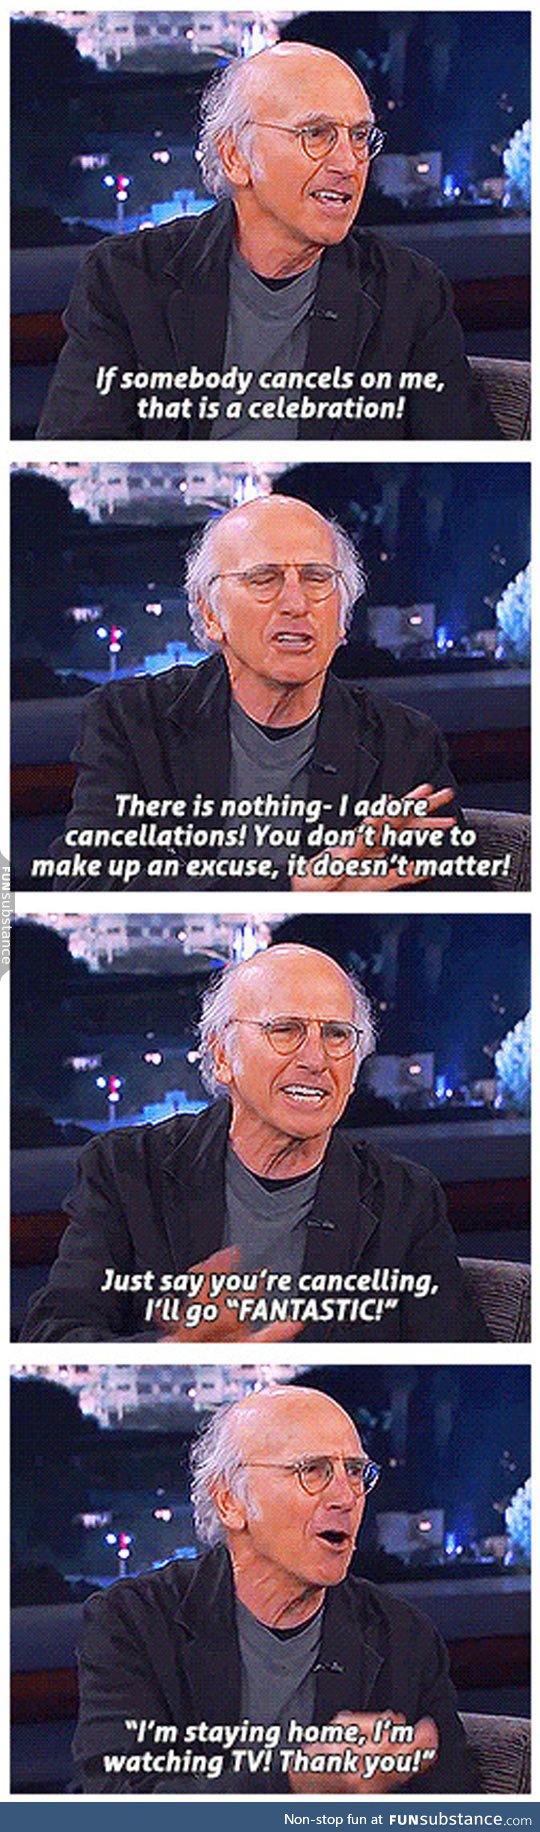 How larry david deals with cancellations